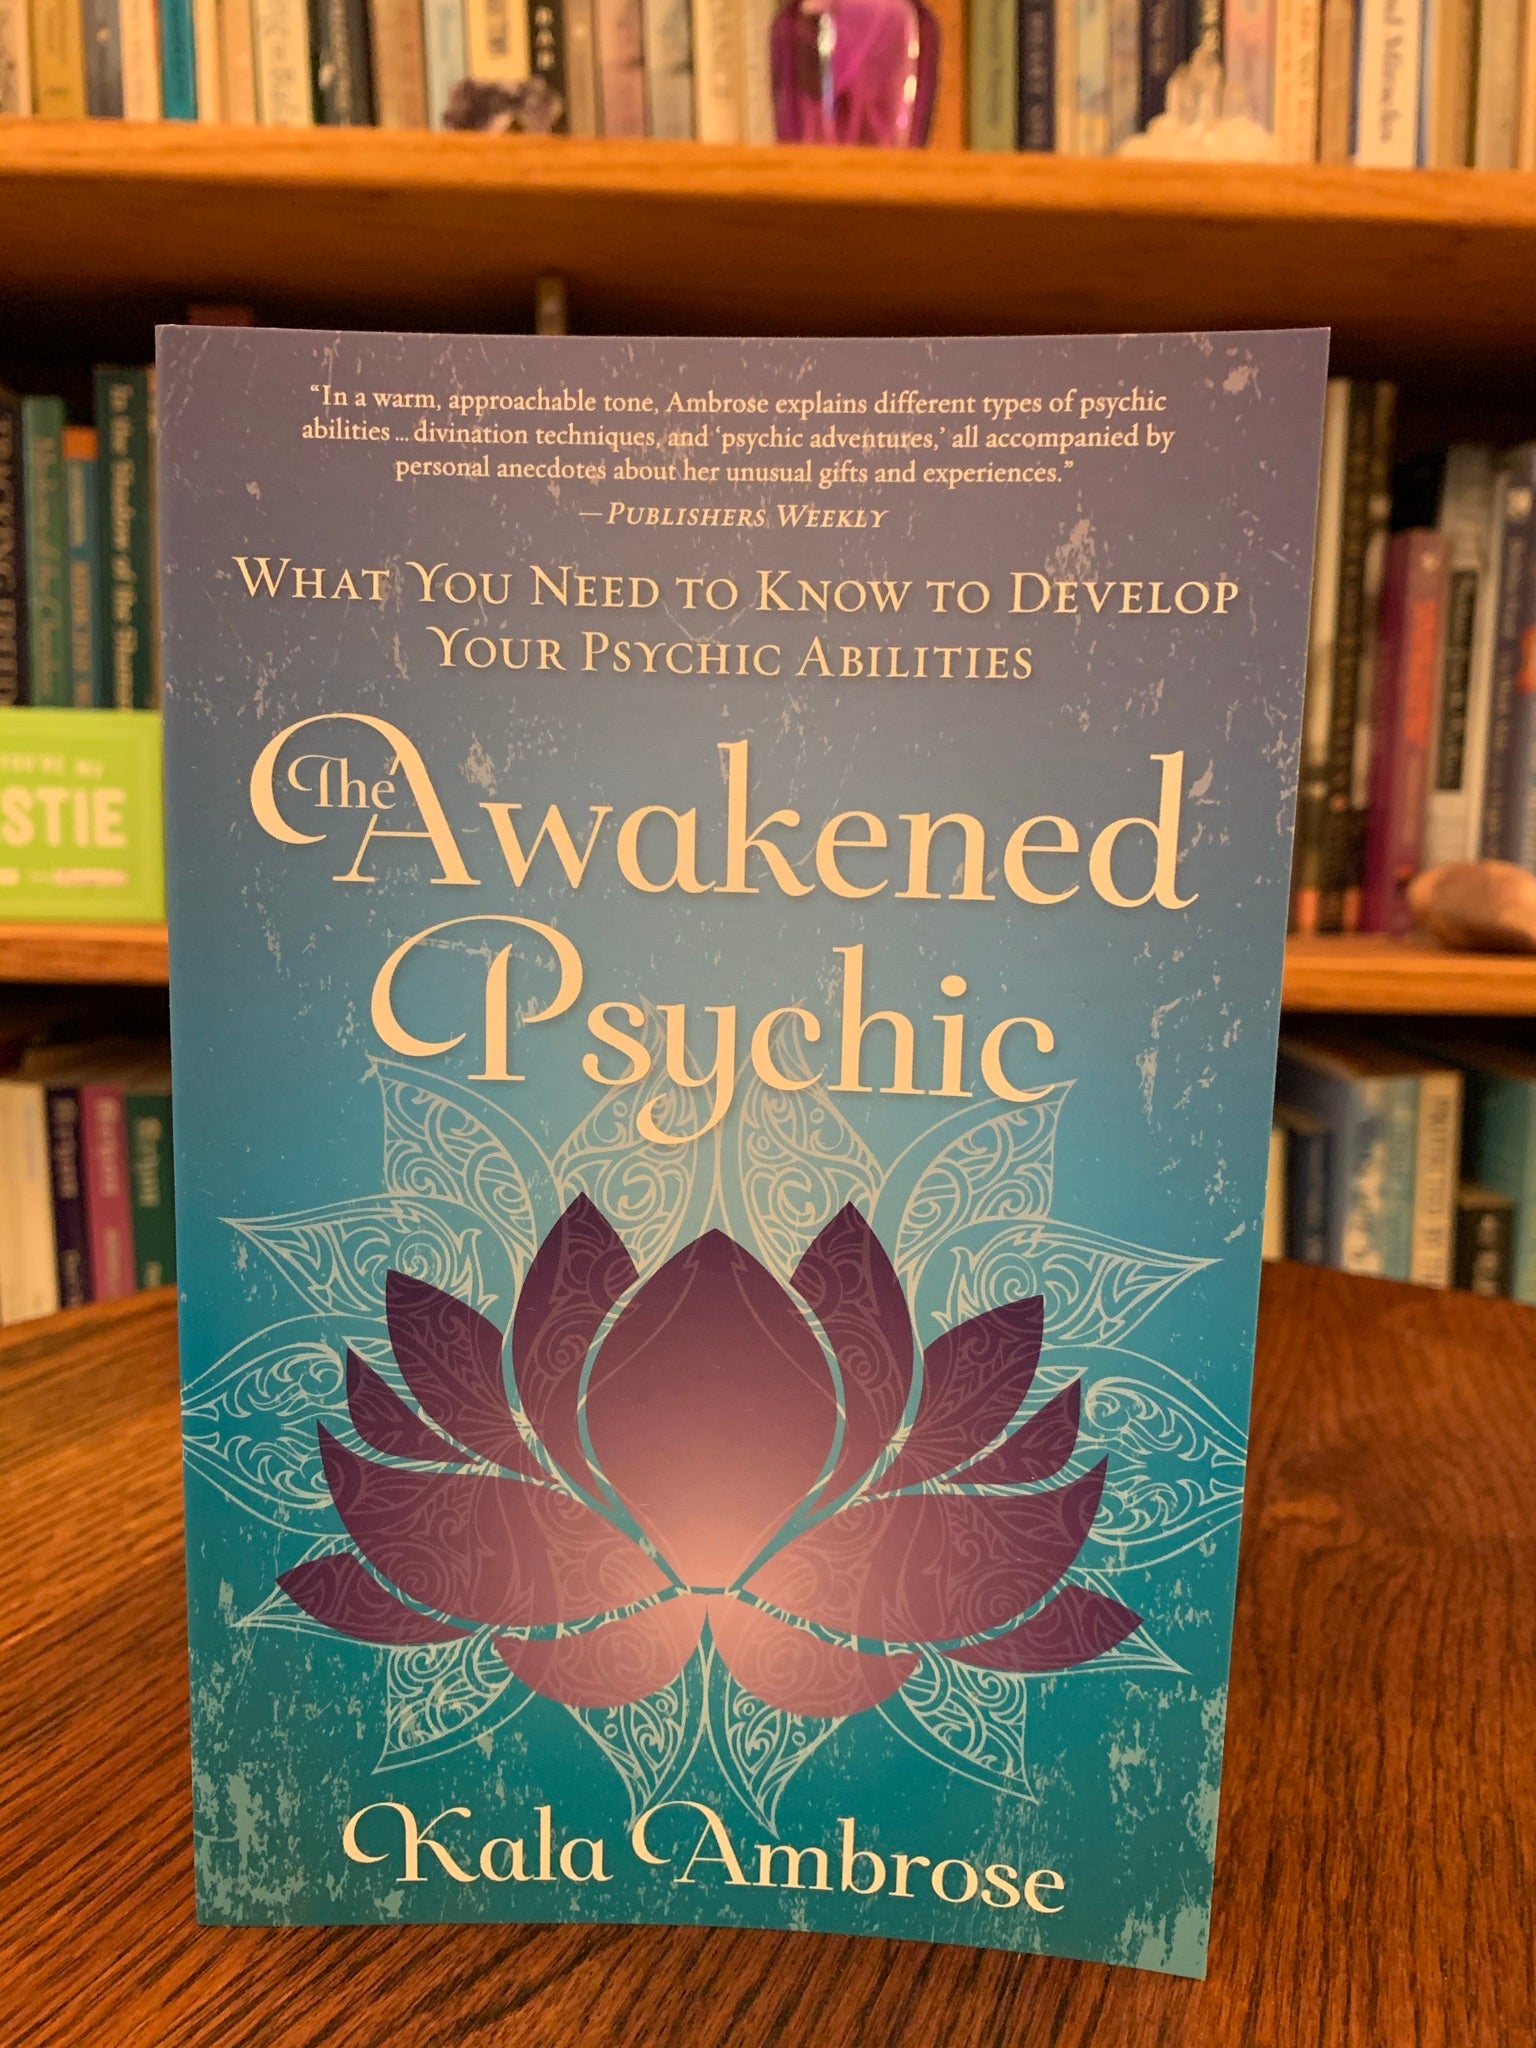 Front Cover. The Awakened Psychic by Kala Ambrose is a guide to help you to discover and enhance psychic abilities and intuition. She also shows you how to connect with loved ones and family members on the other side. Her book also discusses how to get in touch with your spirit guides and your own higher self. Kala Ambrose is an award-winning author and "renowned intuitive coach, spiritual teacher and host of her own show. Cost is $15.99.